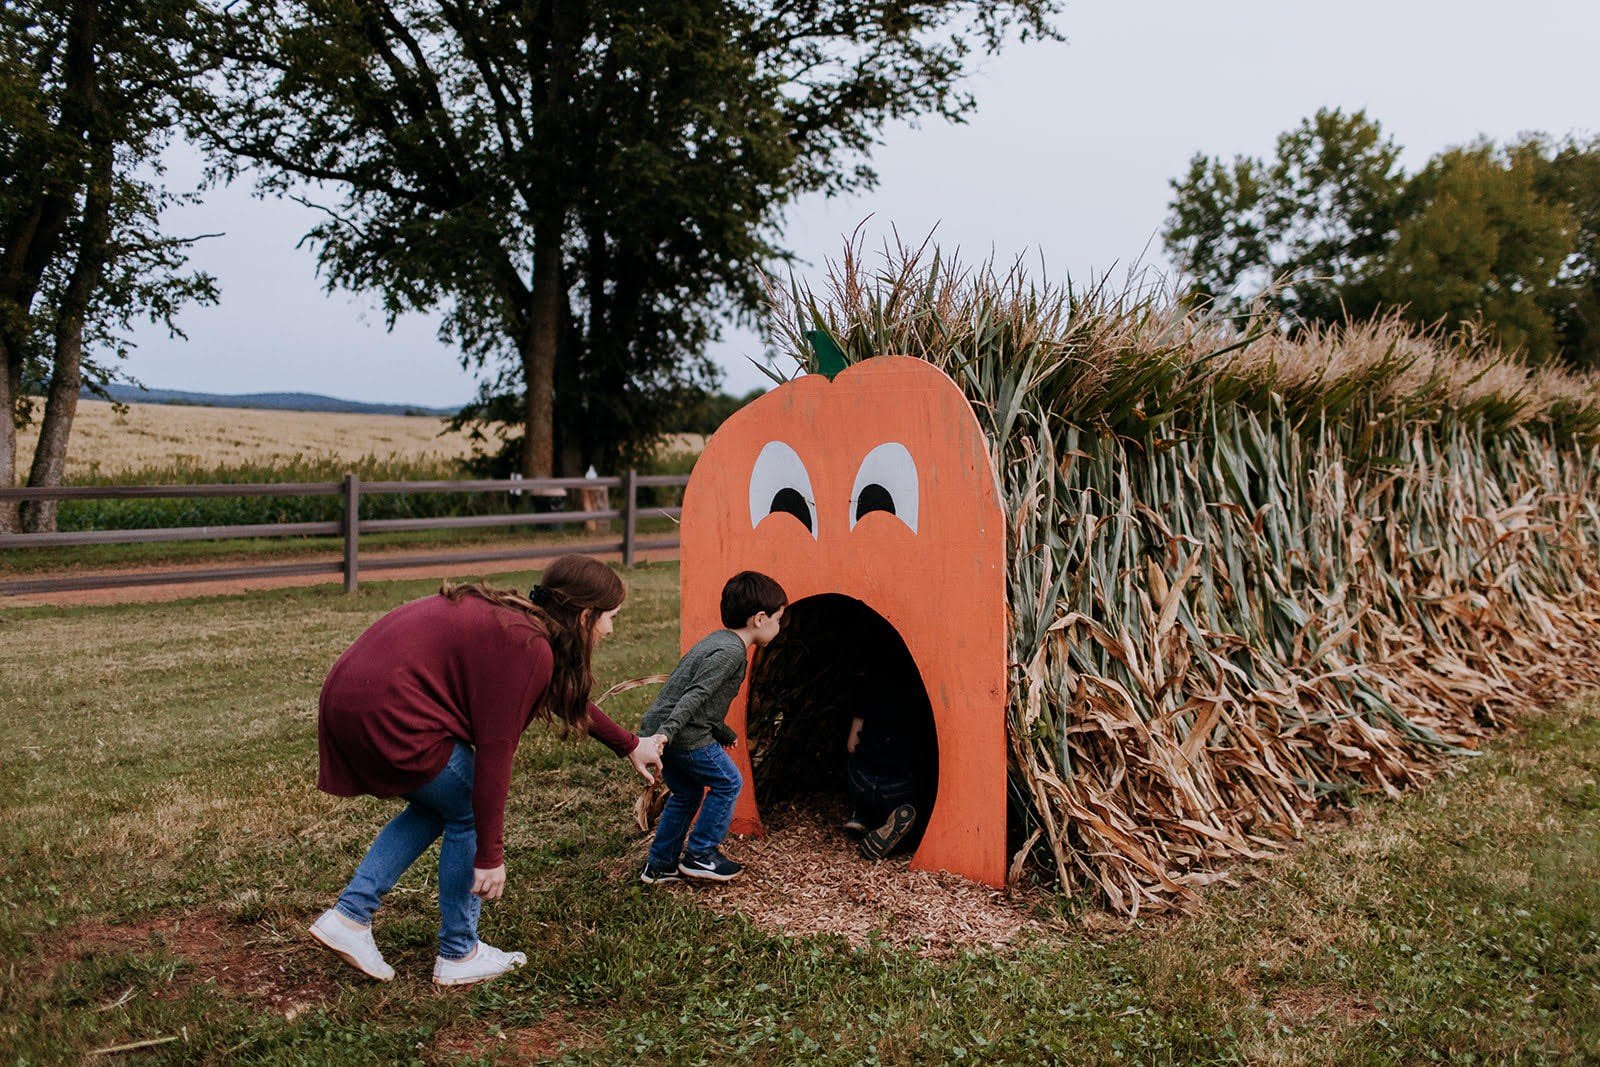  Liberty Mills Farm will hold its Fall Festival Sept. 30 to Oct. 1, with a corn maze, pumpkin patch, vendors and more. (Photo Credit: Courtesy of Liberty Mills Farm) 